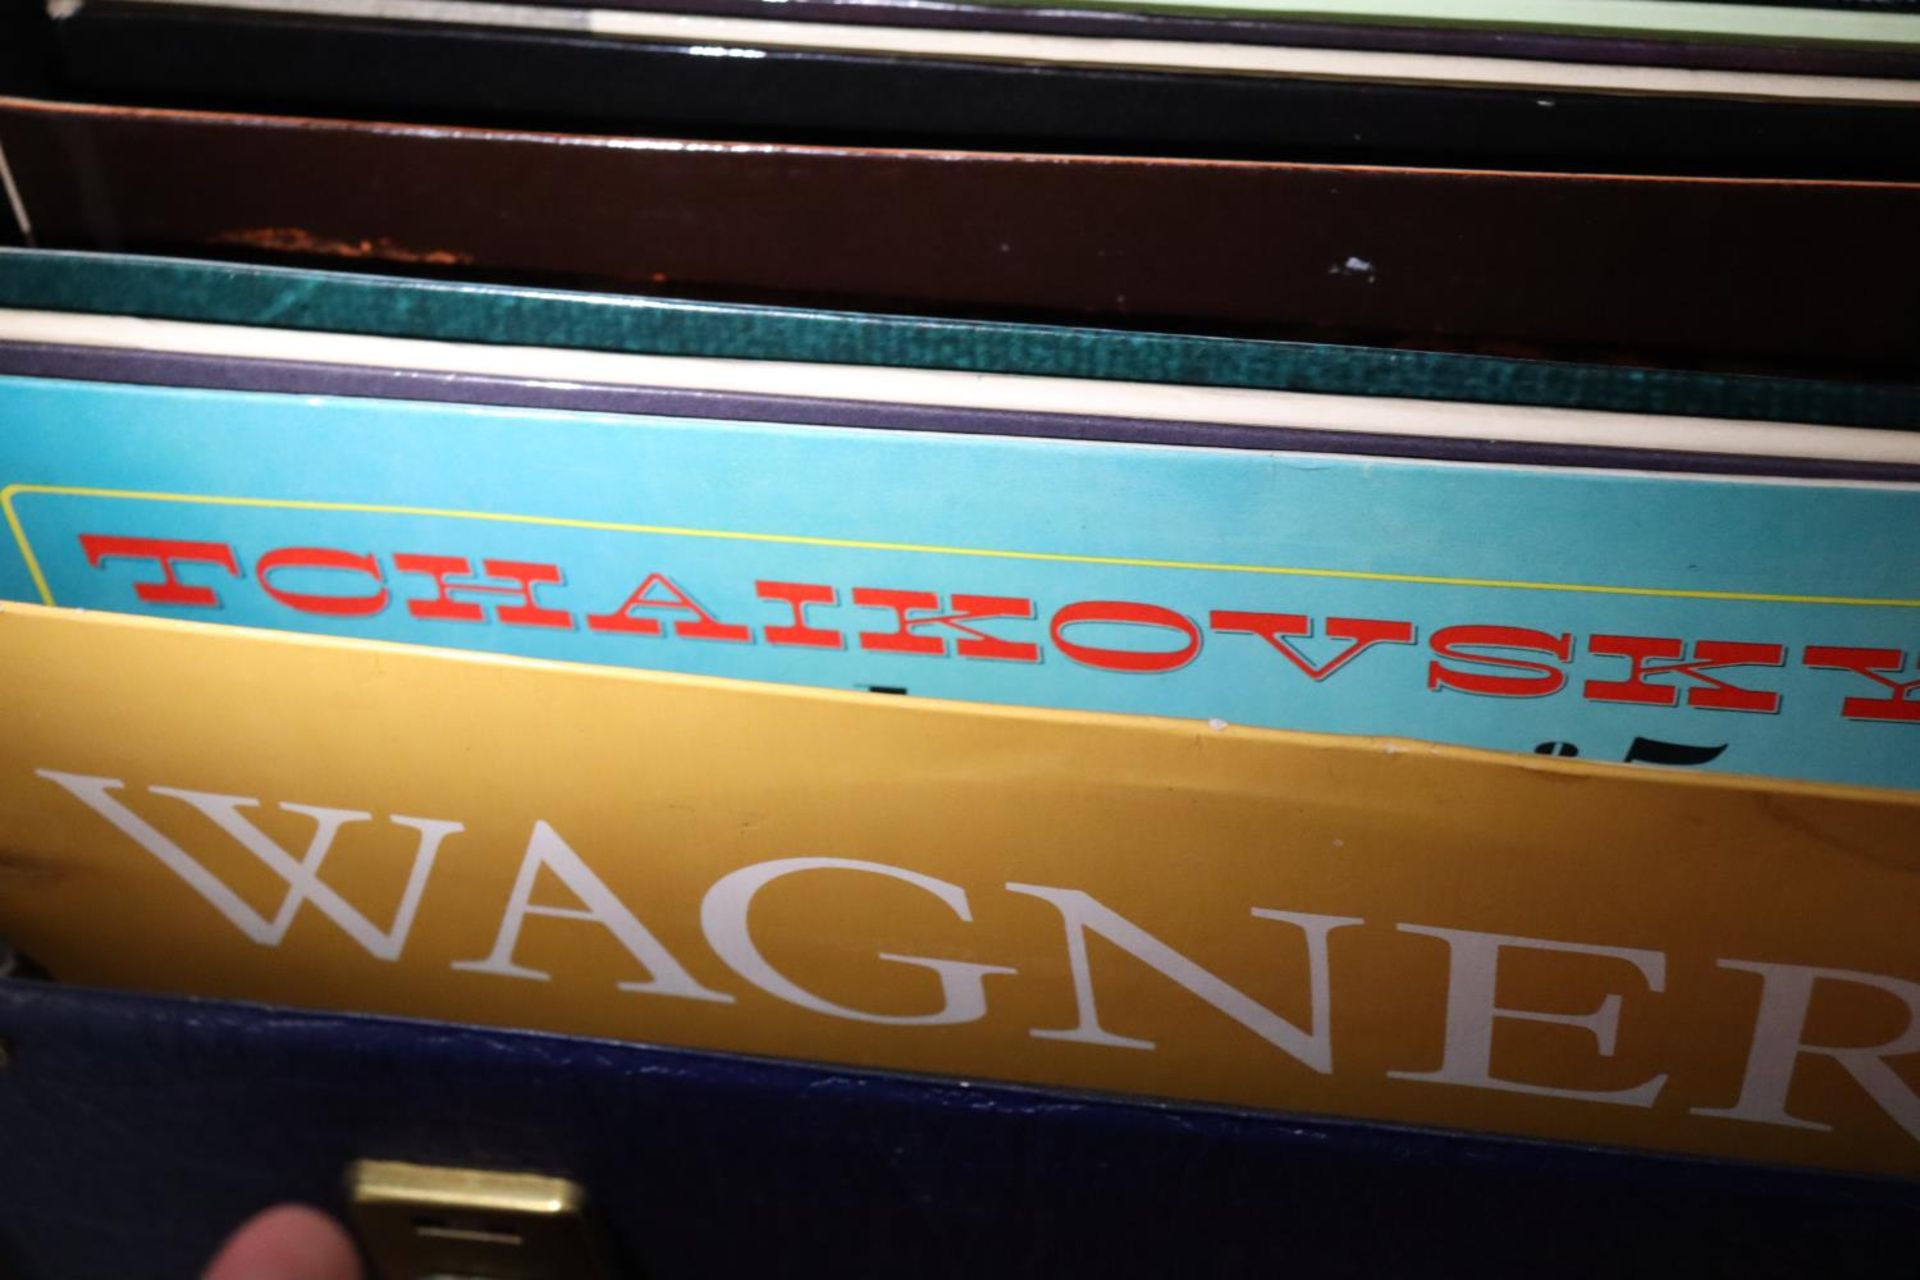 A COLLECTION OF CLASICAL LP VINYL RECORDS IN A CASE - Image 3 of 5